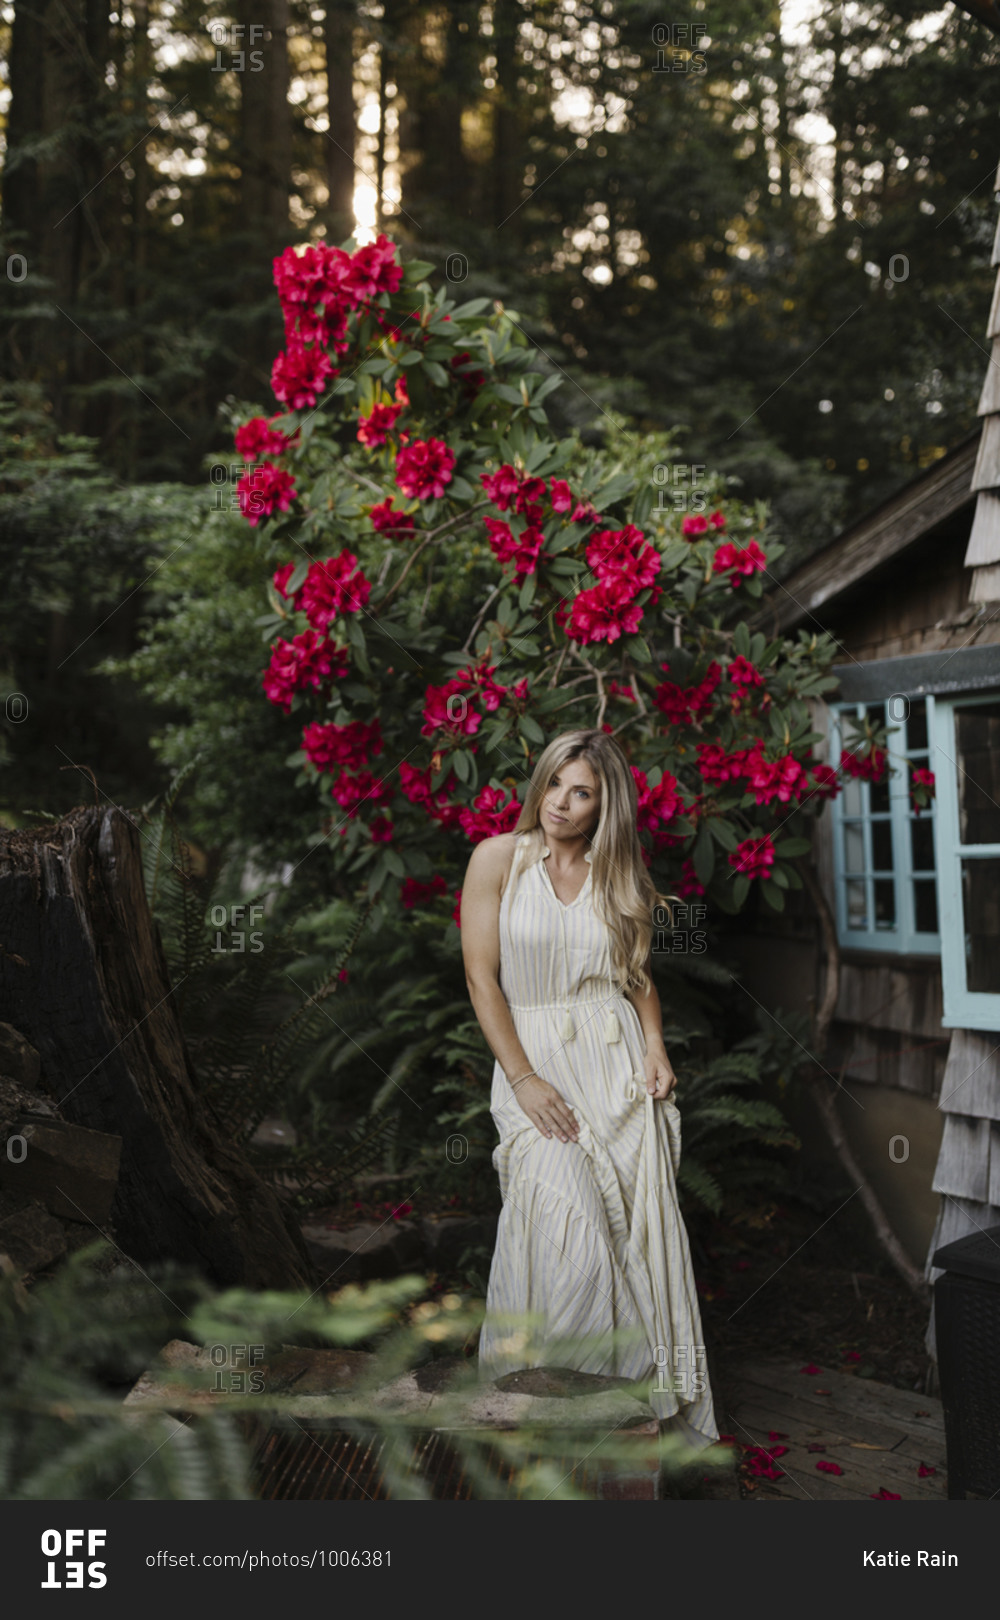 Blonde woman standing in front of a large flowering shrub by a cabin in the woods